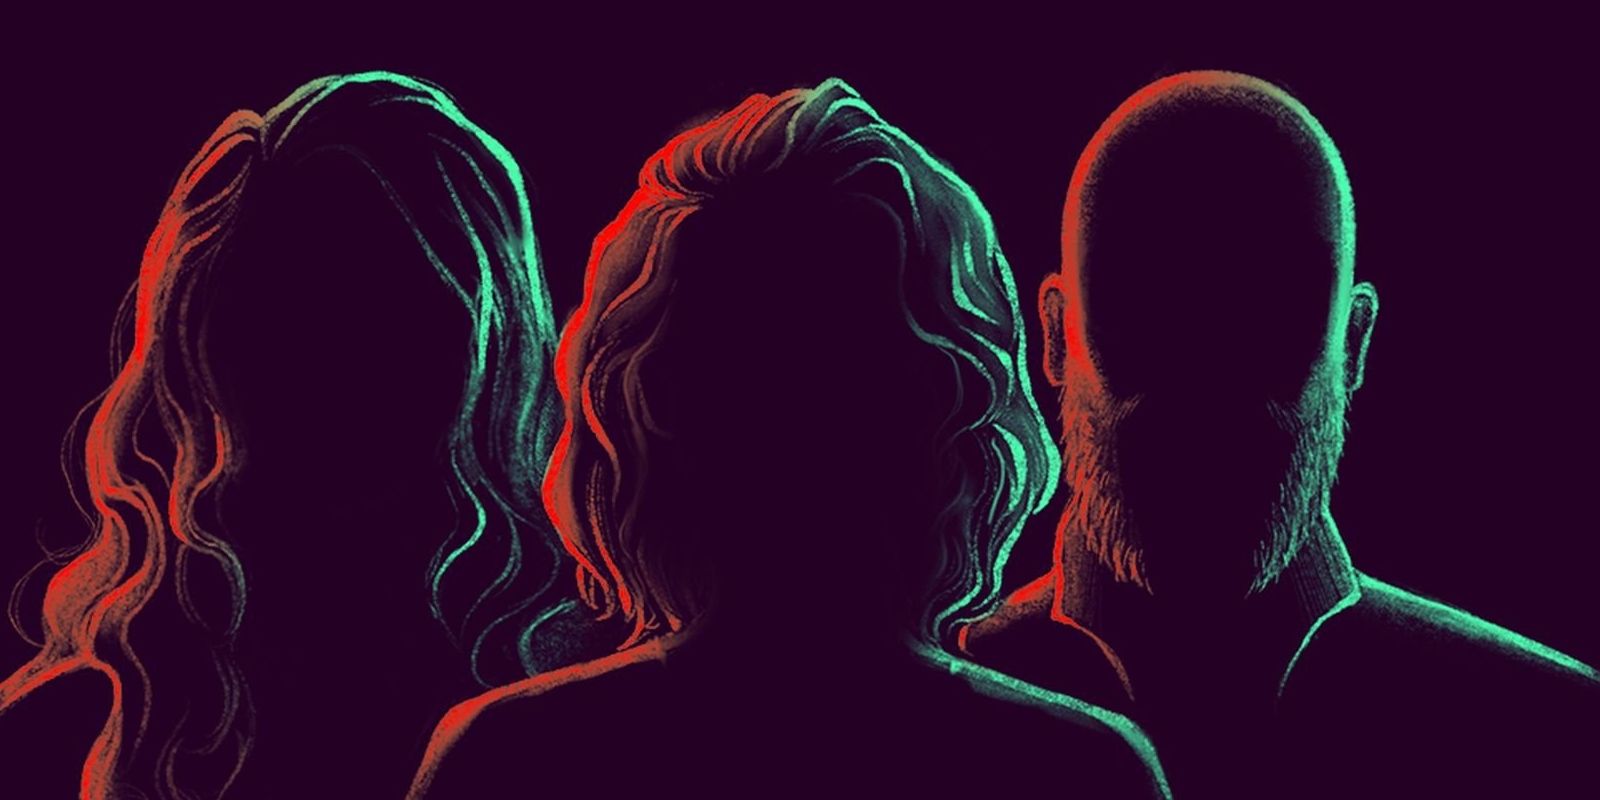 Midst keyart showing three silhouettes, one with long hair, one with short hair, and one bald with a beard